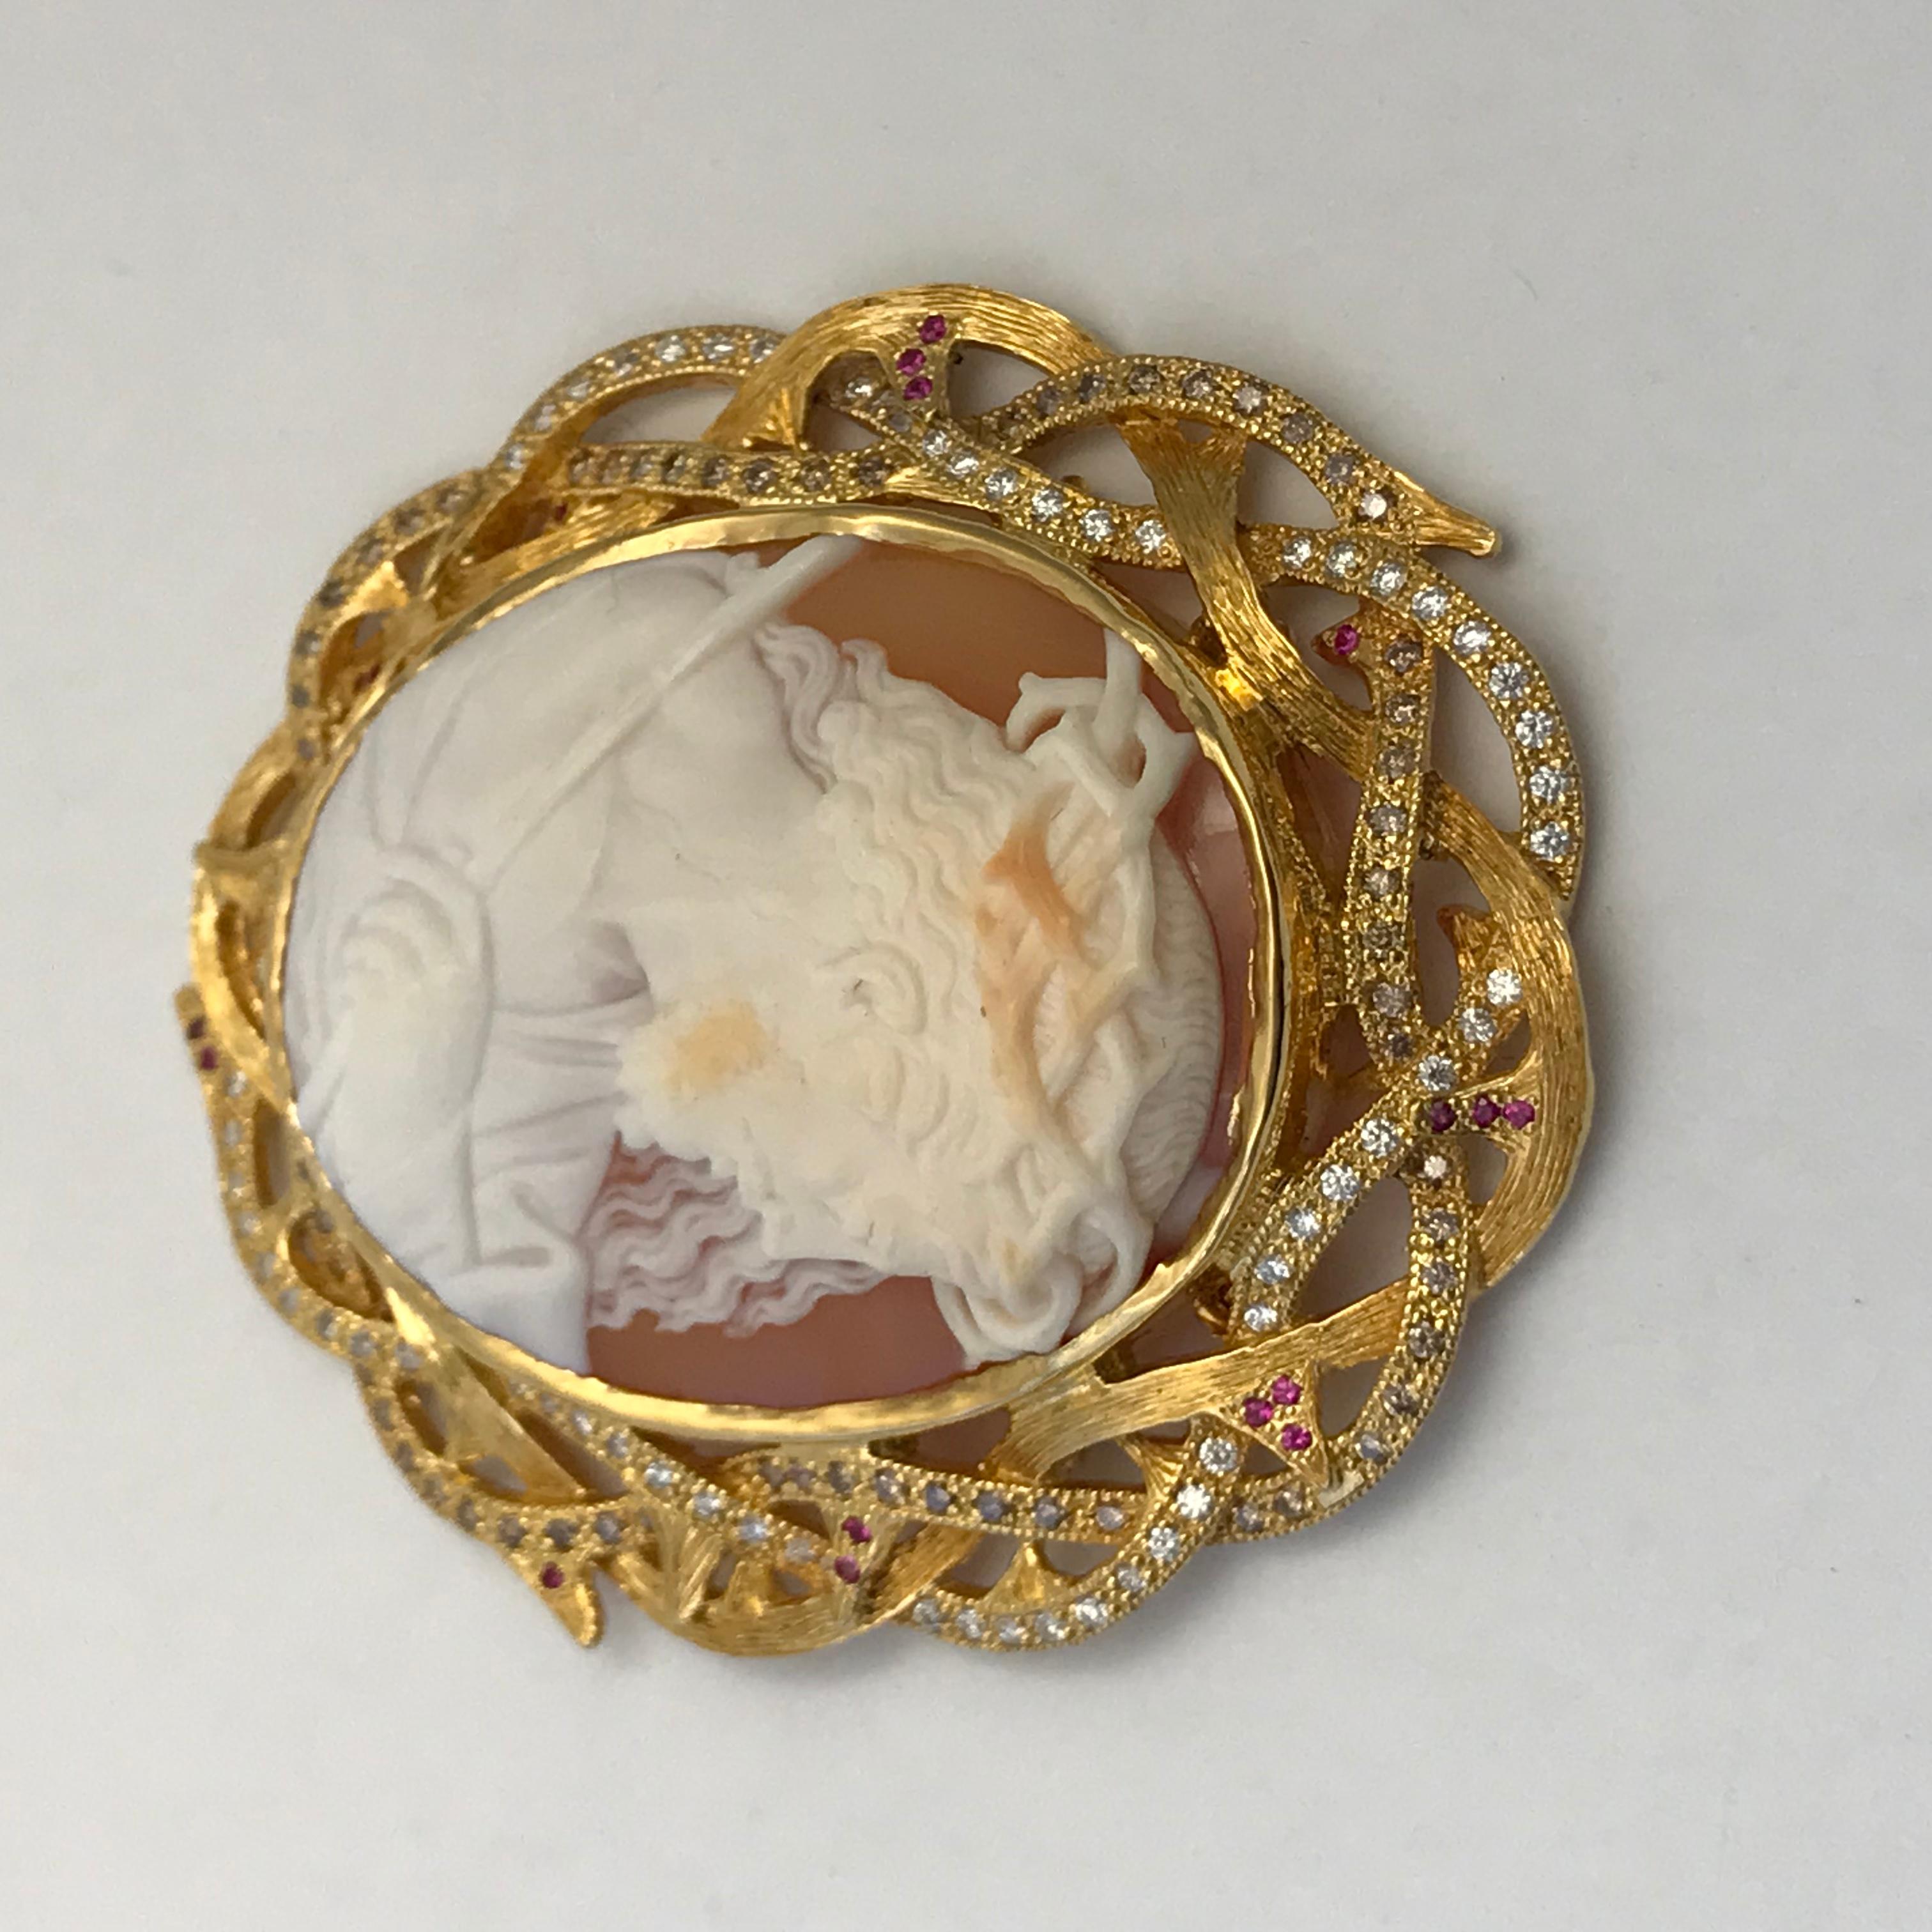 Cameo 1890s Jesus Set in 14 Karat Gold with Diamonds, Rubies and Brown Diamonds For Sale 2